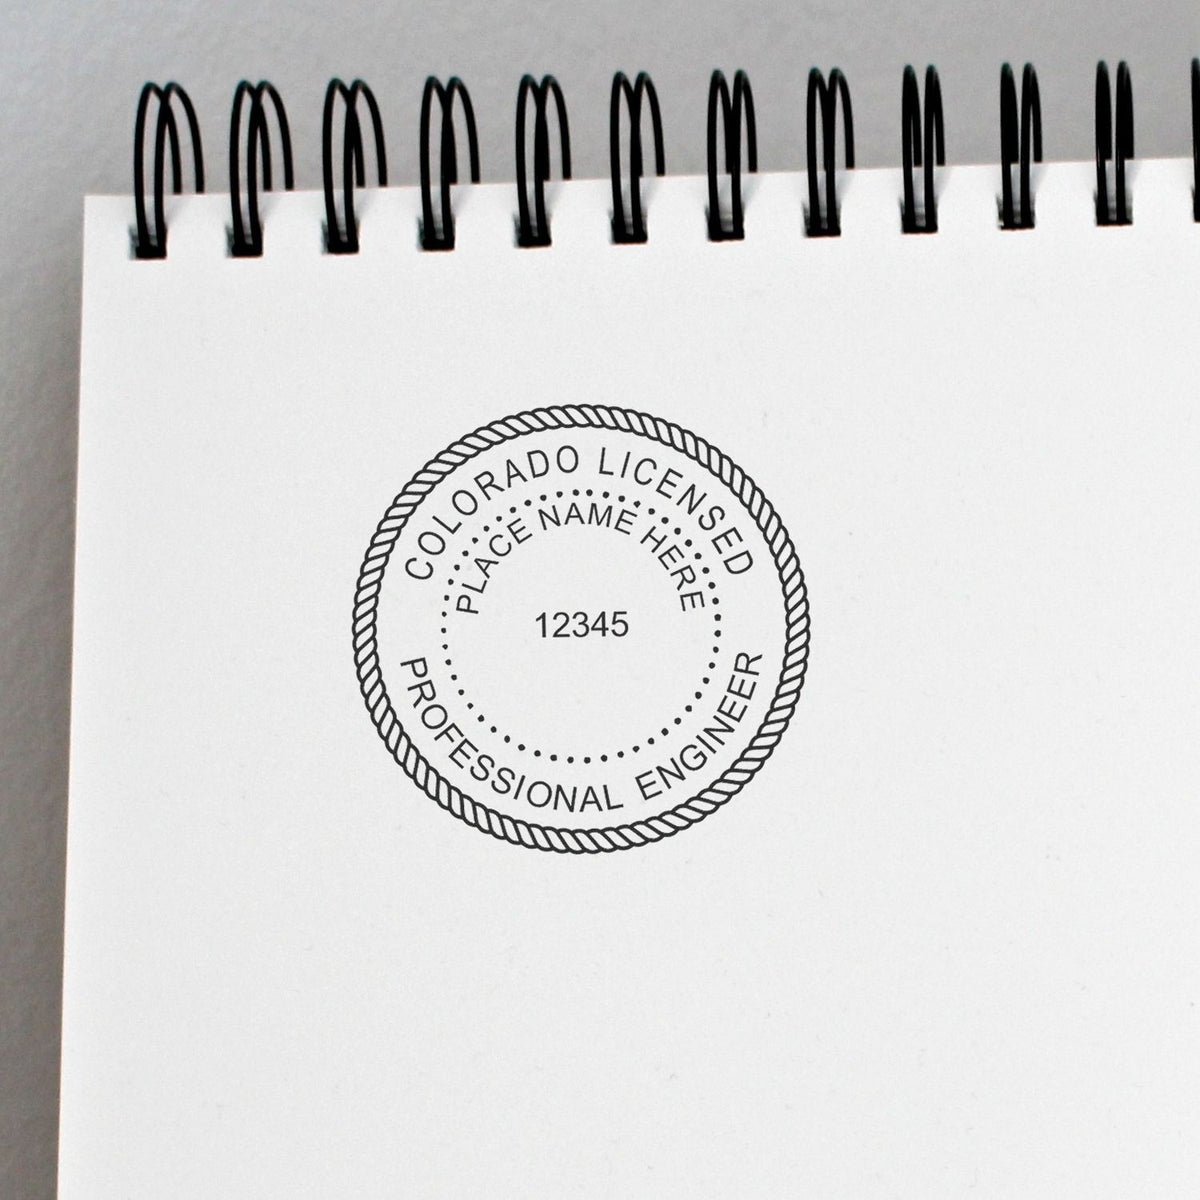 This paper is stamped with a sample imprint of the Digital Colorado PE Stamp and Electronic Seal for Colorado Engineer, signifying its quality and reliability.